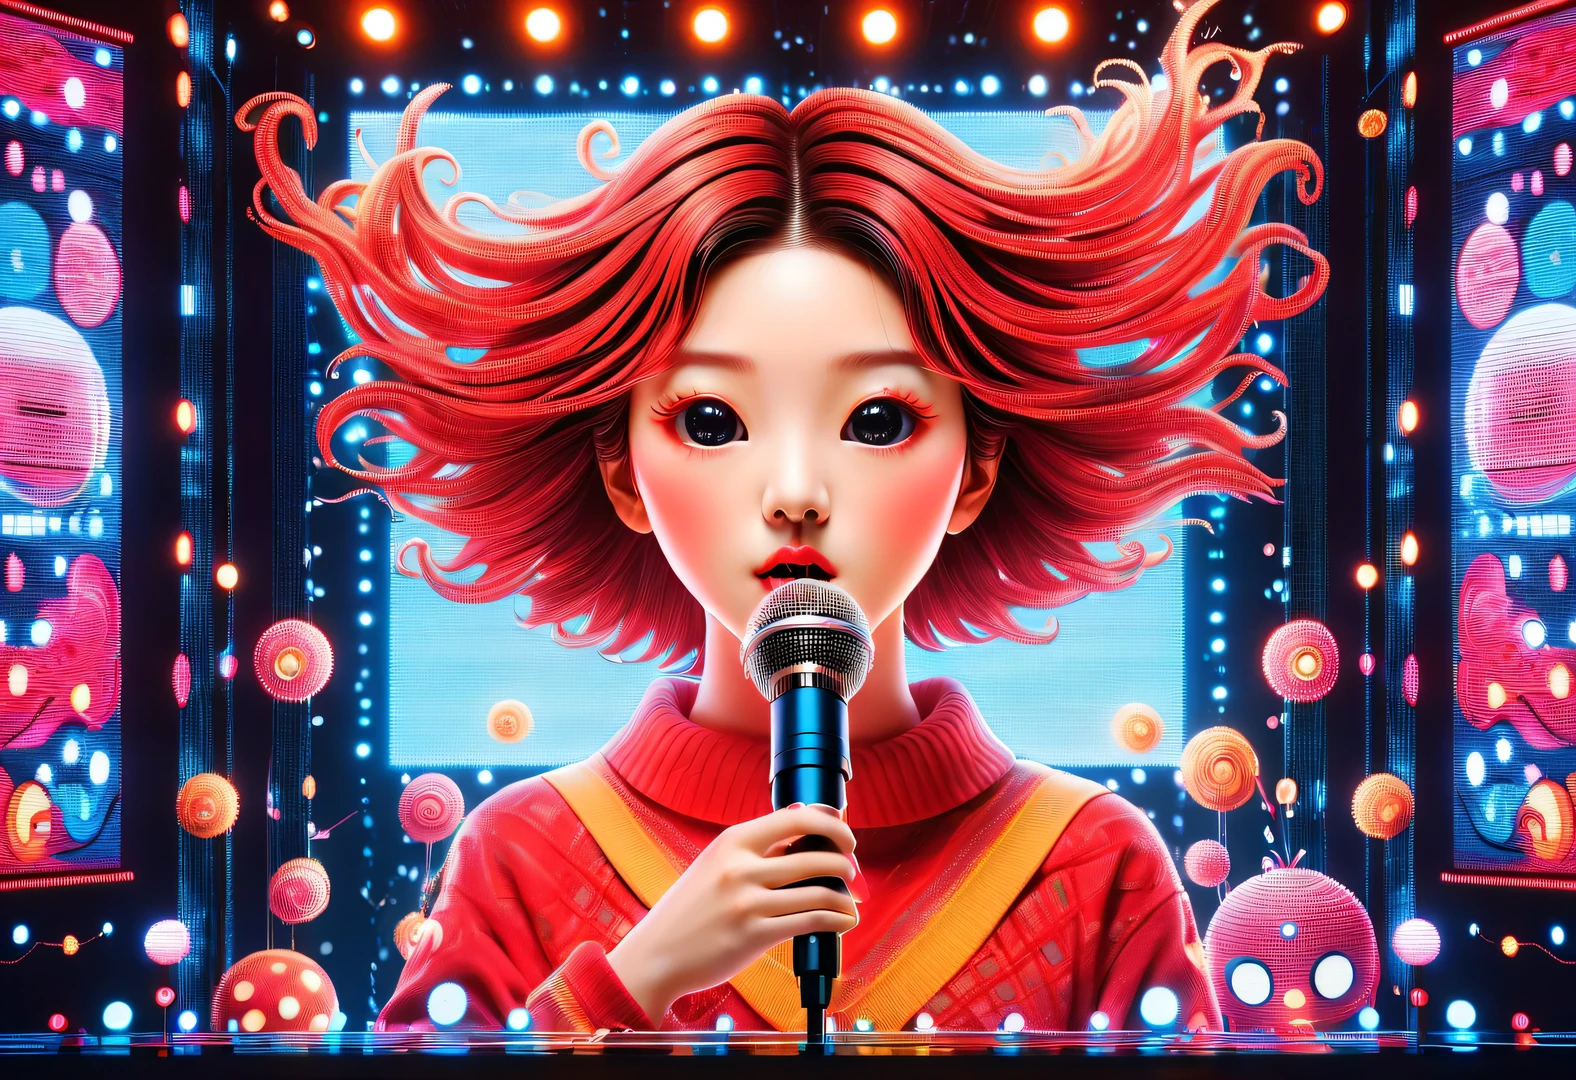 vaporwave style,Beautiful detailed,Vector illustration, Minimalism, digital illustration, Vector illustration，Minimalism，digital illustration，Hacker wearing sweatshirt and mask is working，T-shirt design，dramatic lighting，Art exhibition trends ，Award-winning，icon，Highly detailed cute lively Korean girl 18-year-old Shim Eun-kyung happily singing loudly in front of a super huge LED screen），（）holding a microphone），Jumping pose，dynamic action，inspired by《strange her》，Shen Eun-kyung combed her hair into a slightly curly baby style，Very fair skin，There are two charming dimples on both cheeks，Wearing a red embroidered lace dress，background：LED screen, dramatic lighting,

